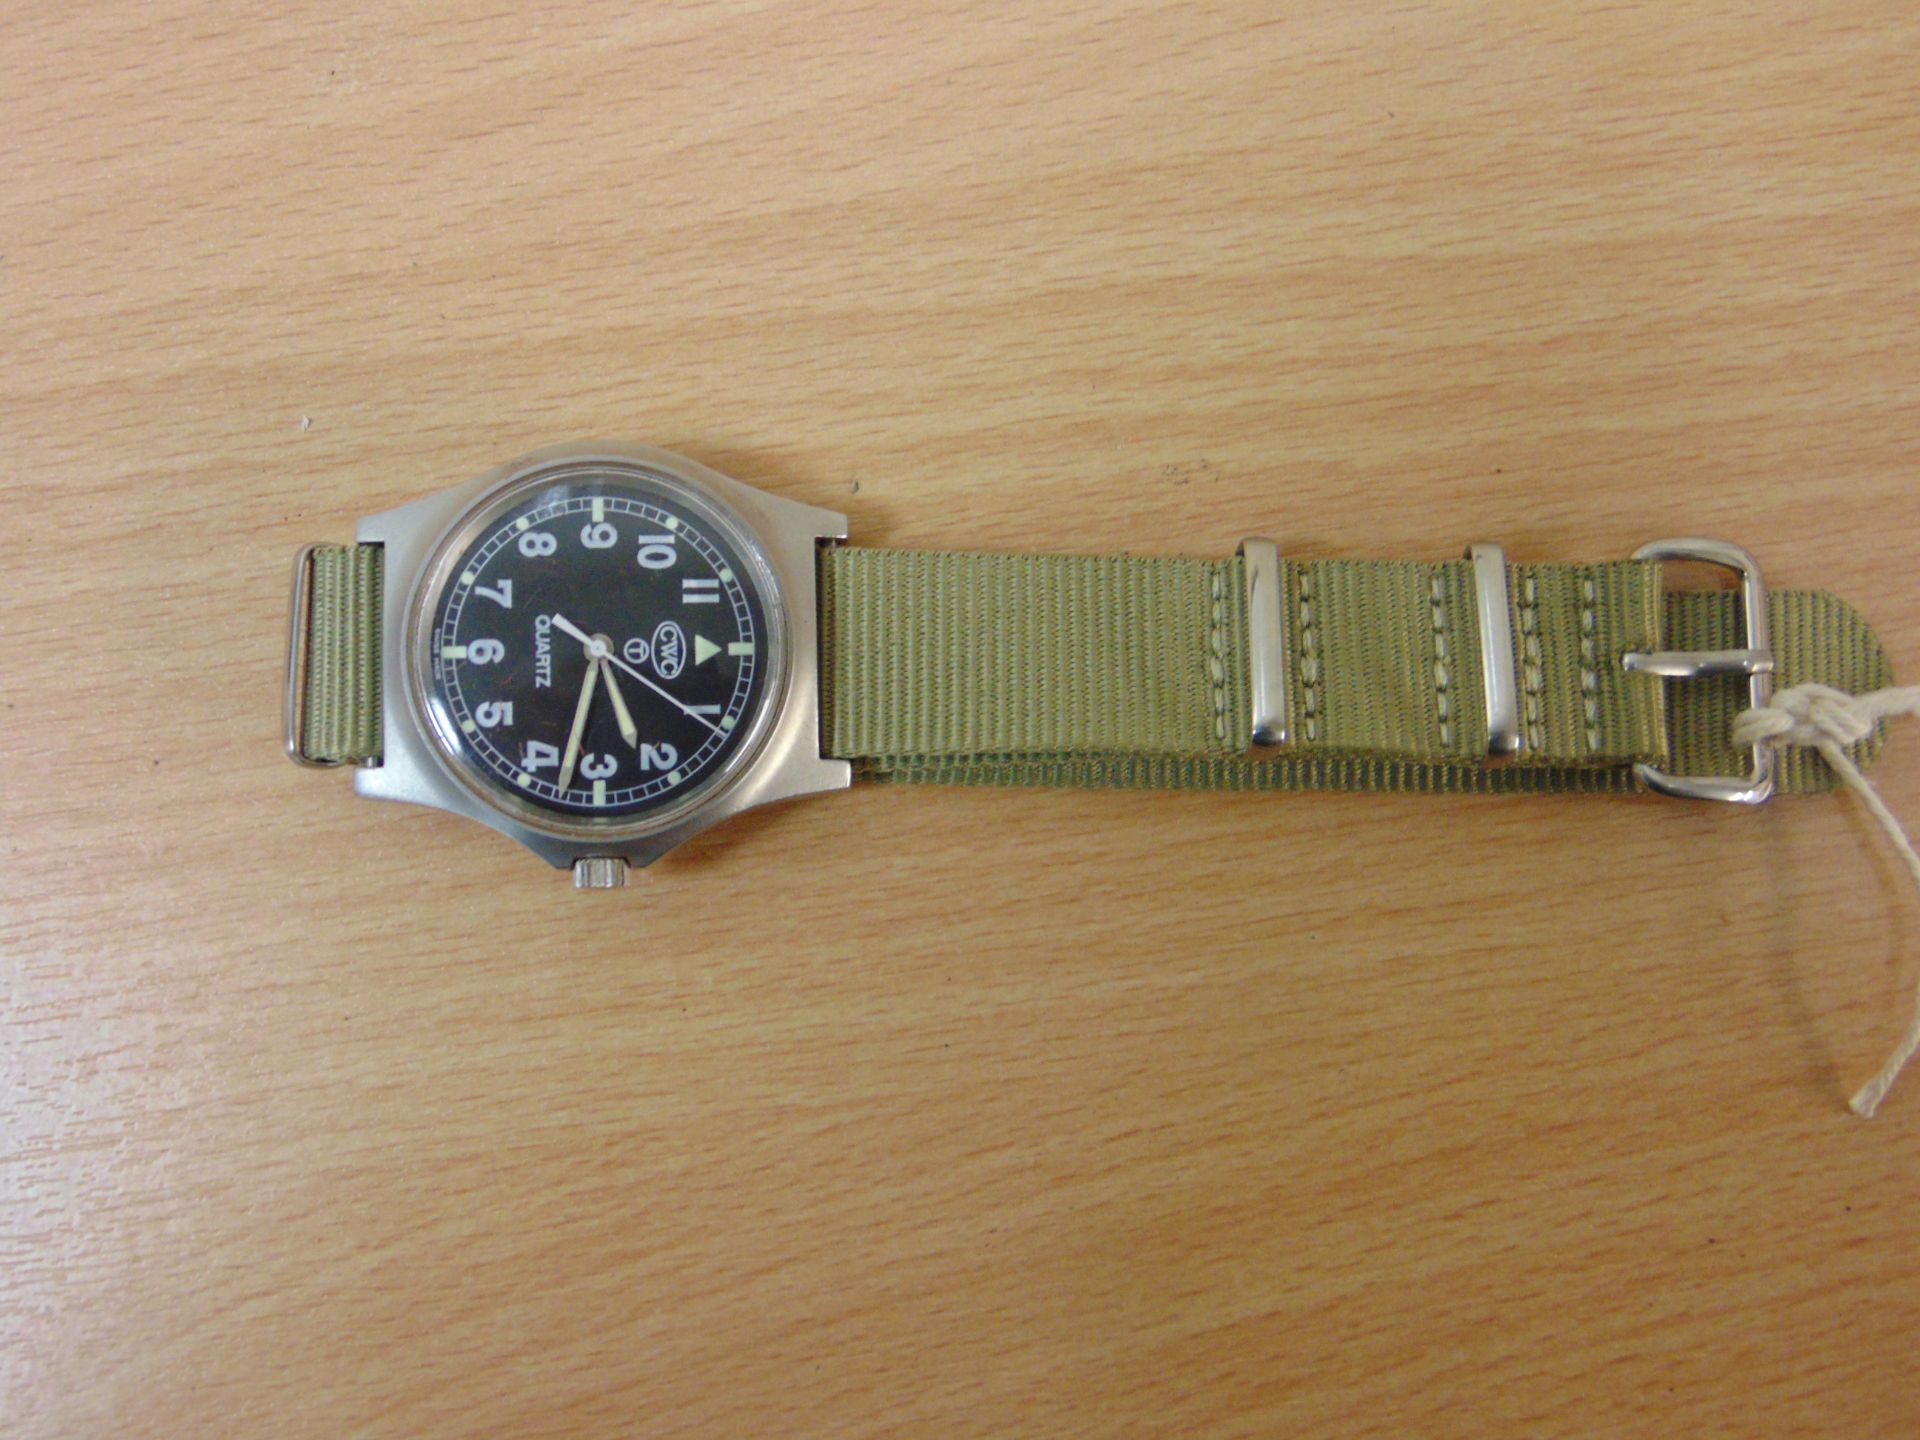 VERY RARE 0552 CWC ROYAL MARINES ISSUE SERVICE WATCH DATE 1989 (GULF WAR) - Image 5 of 9